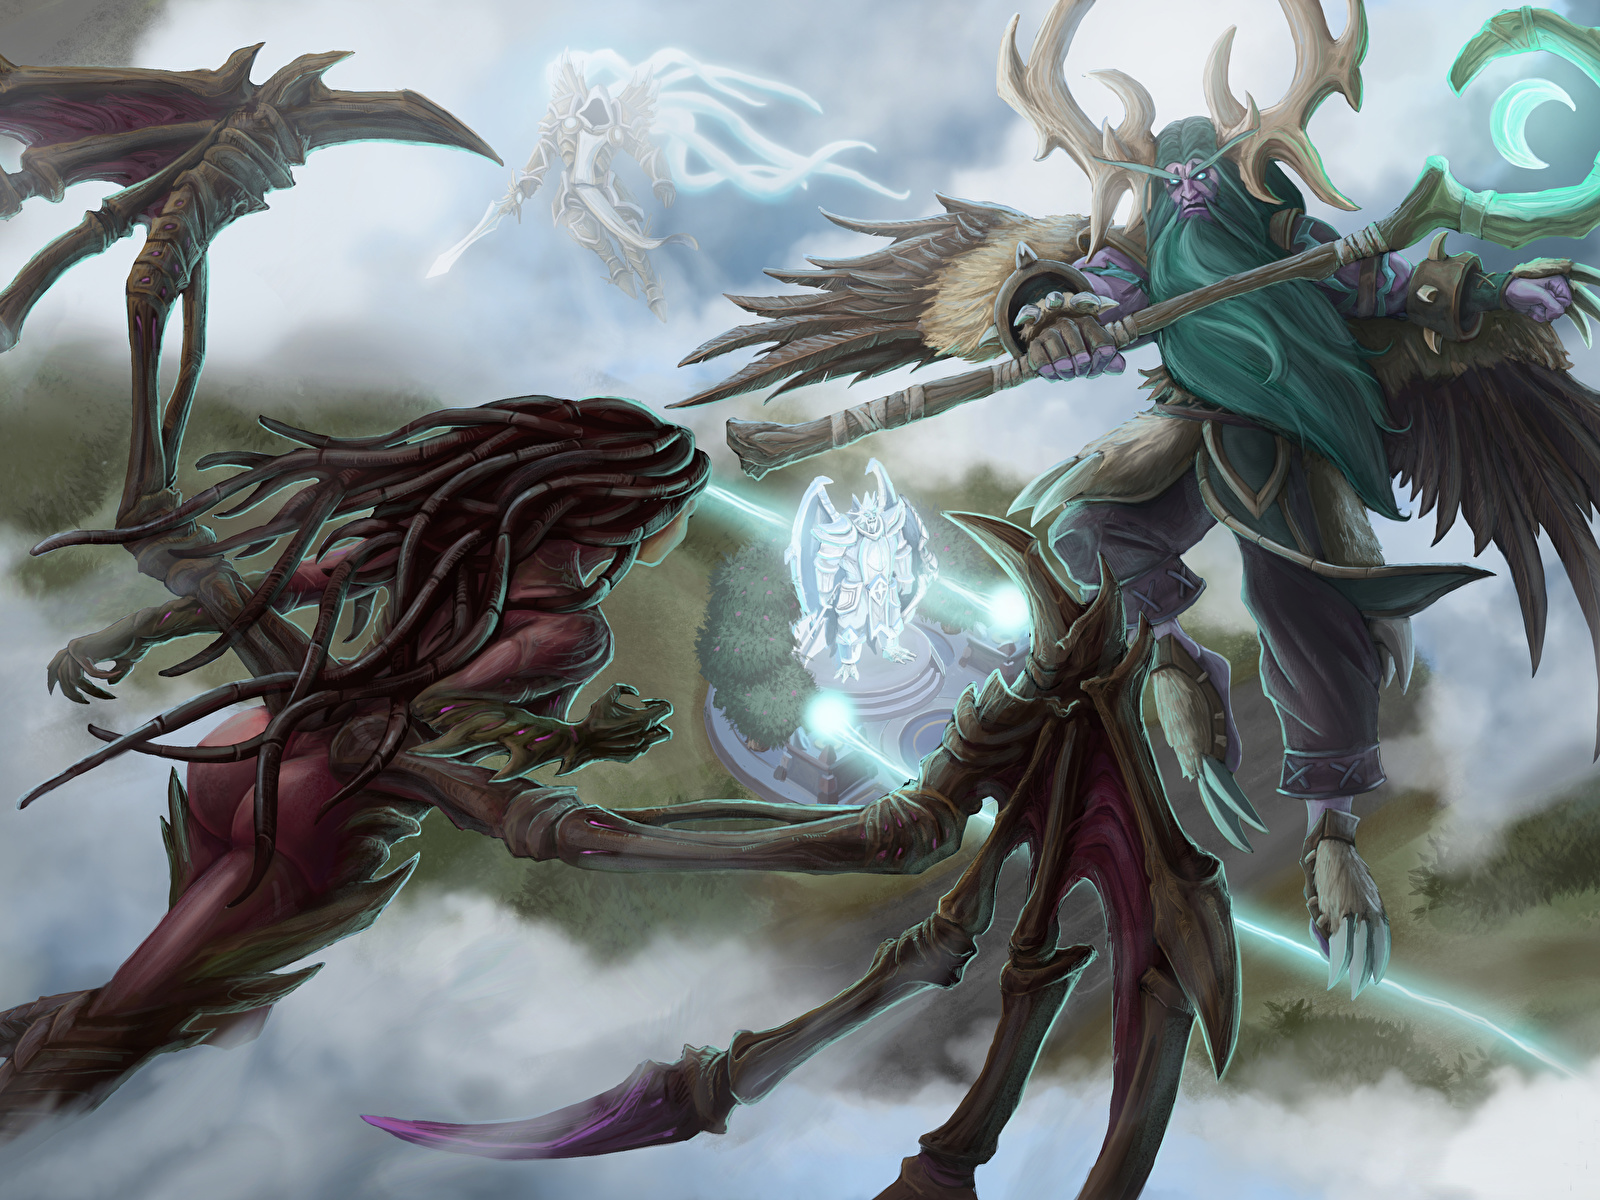 1600x1200、Heroes of the Storm、サラ・ケリガン、Archangel of Justice, Malfurion, Tyrael、翼、��ンピュータゲーム、ゲーム、ファンタジー、